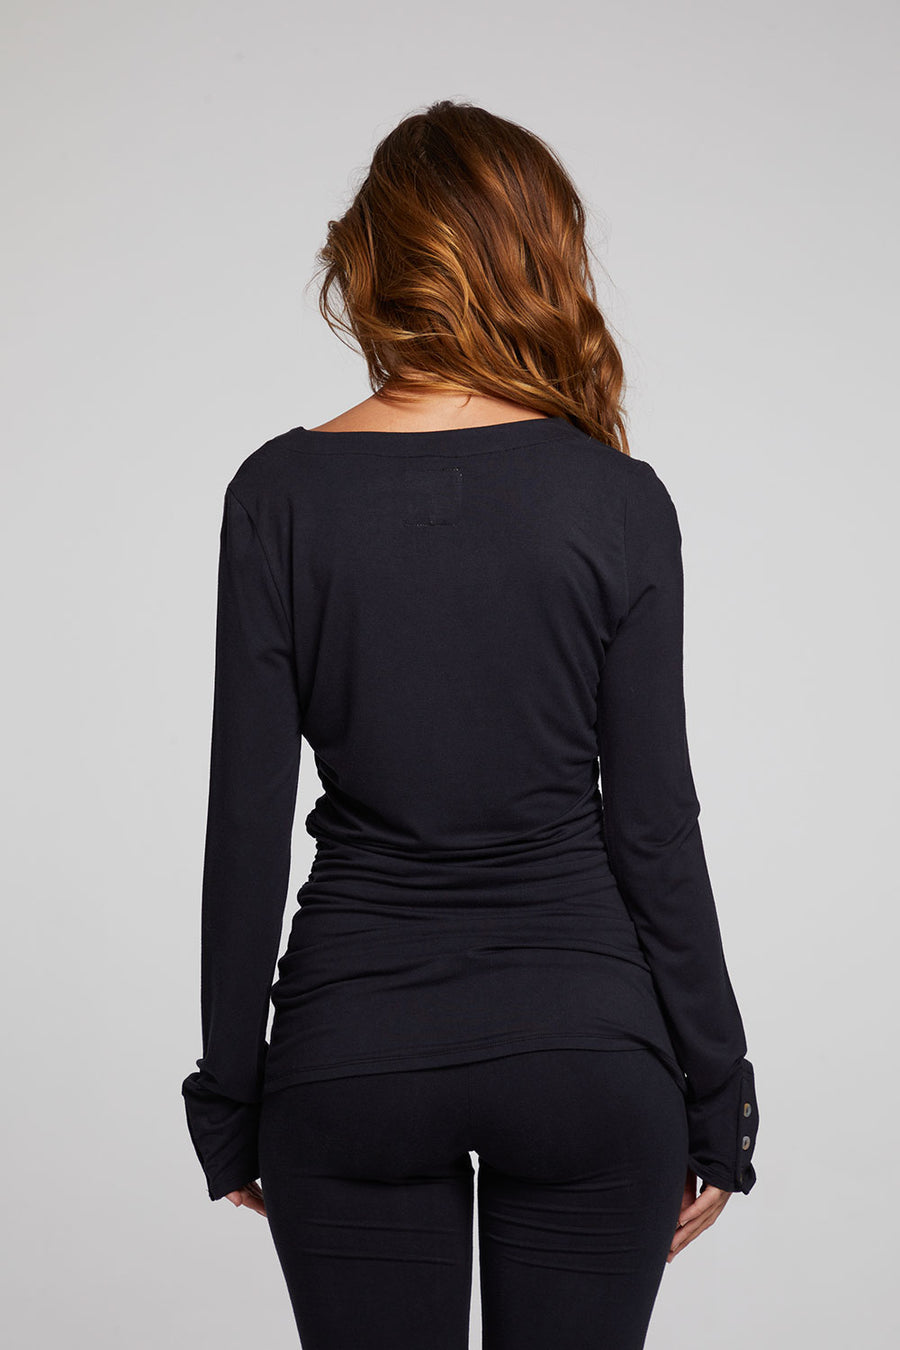 Priscilla Licorice Long Sleeve WOMENS chaserbrand